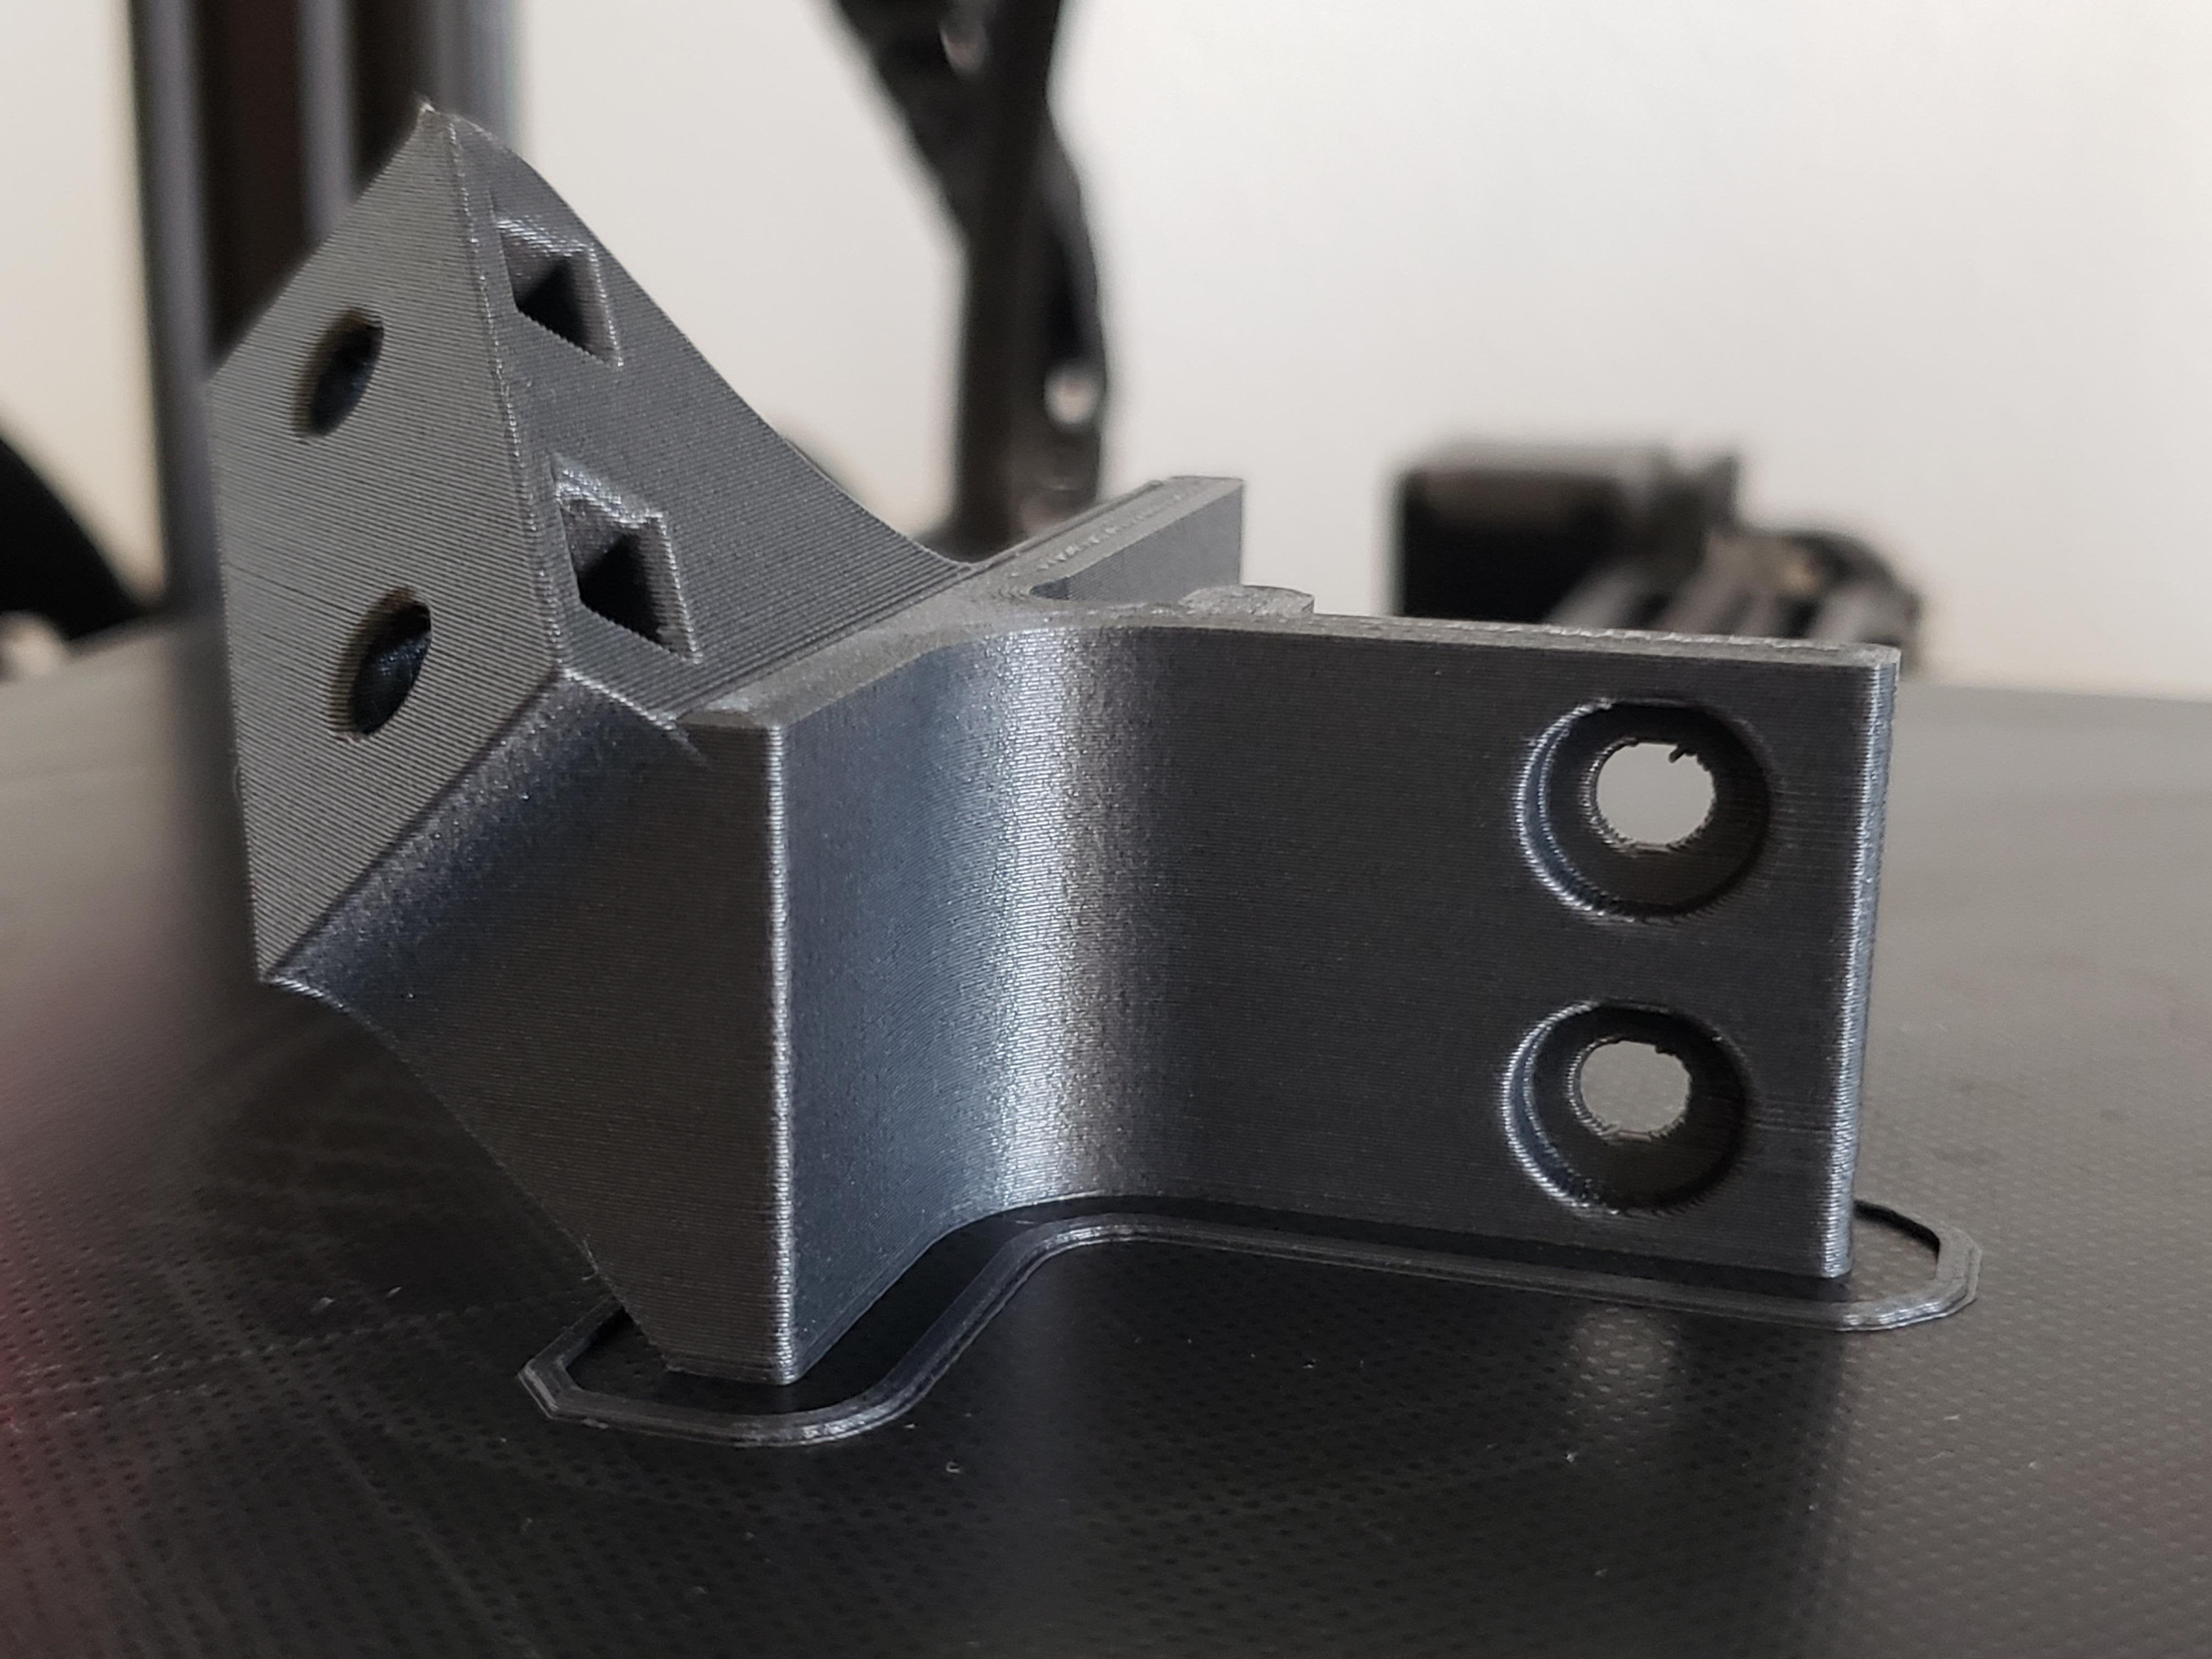 Can you print carbon fiber filament with the Ender 3?